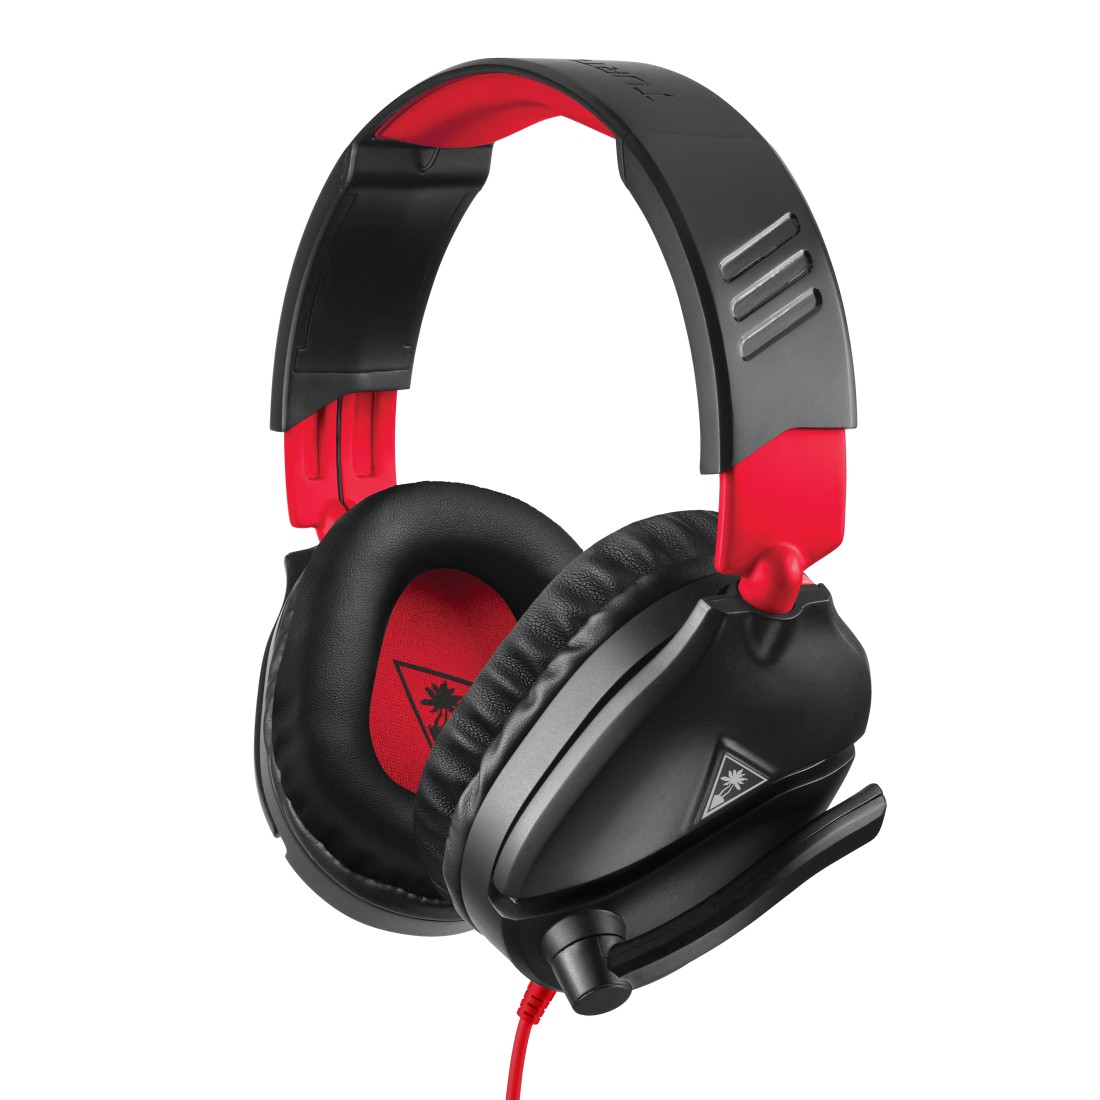 Recon TURTLE BEACH Headset Schwarz/Rot Over-ear 70, Gaming